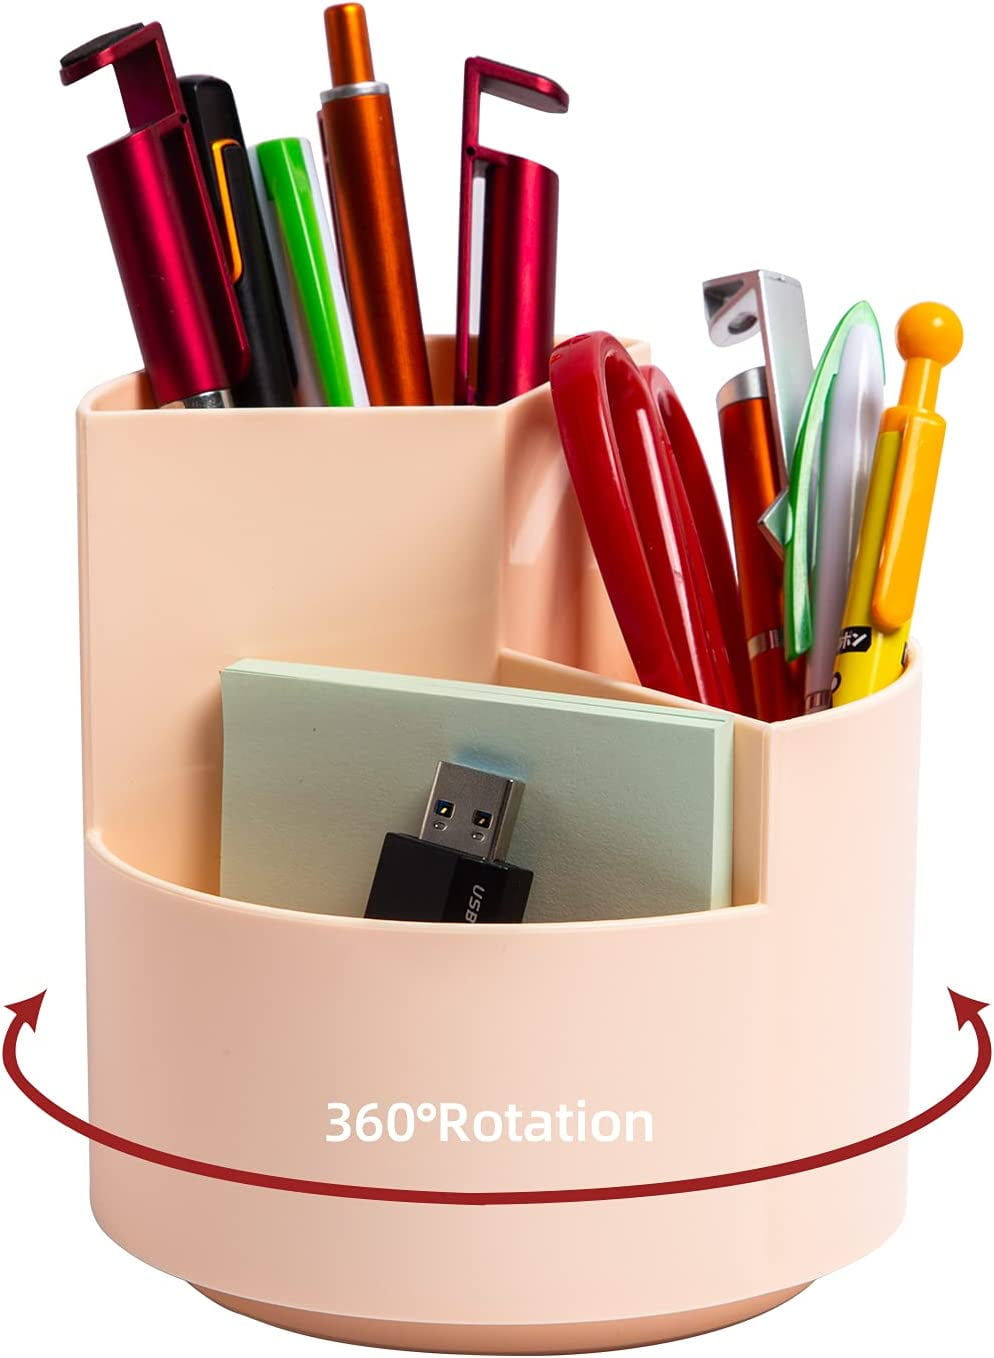 Yeaqee 20 Pcs Pencil Shaped Pen Holders Colored Pencil Storage Organizer  Cute Pencil Holder Pen Cups Pencil Pot for School Classroom Office Supplies